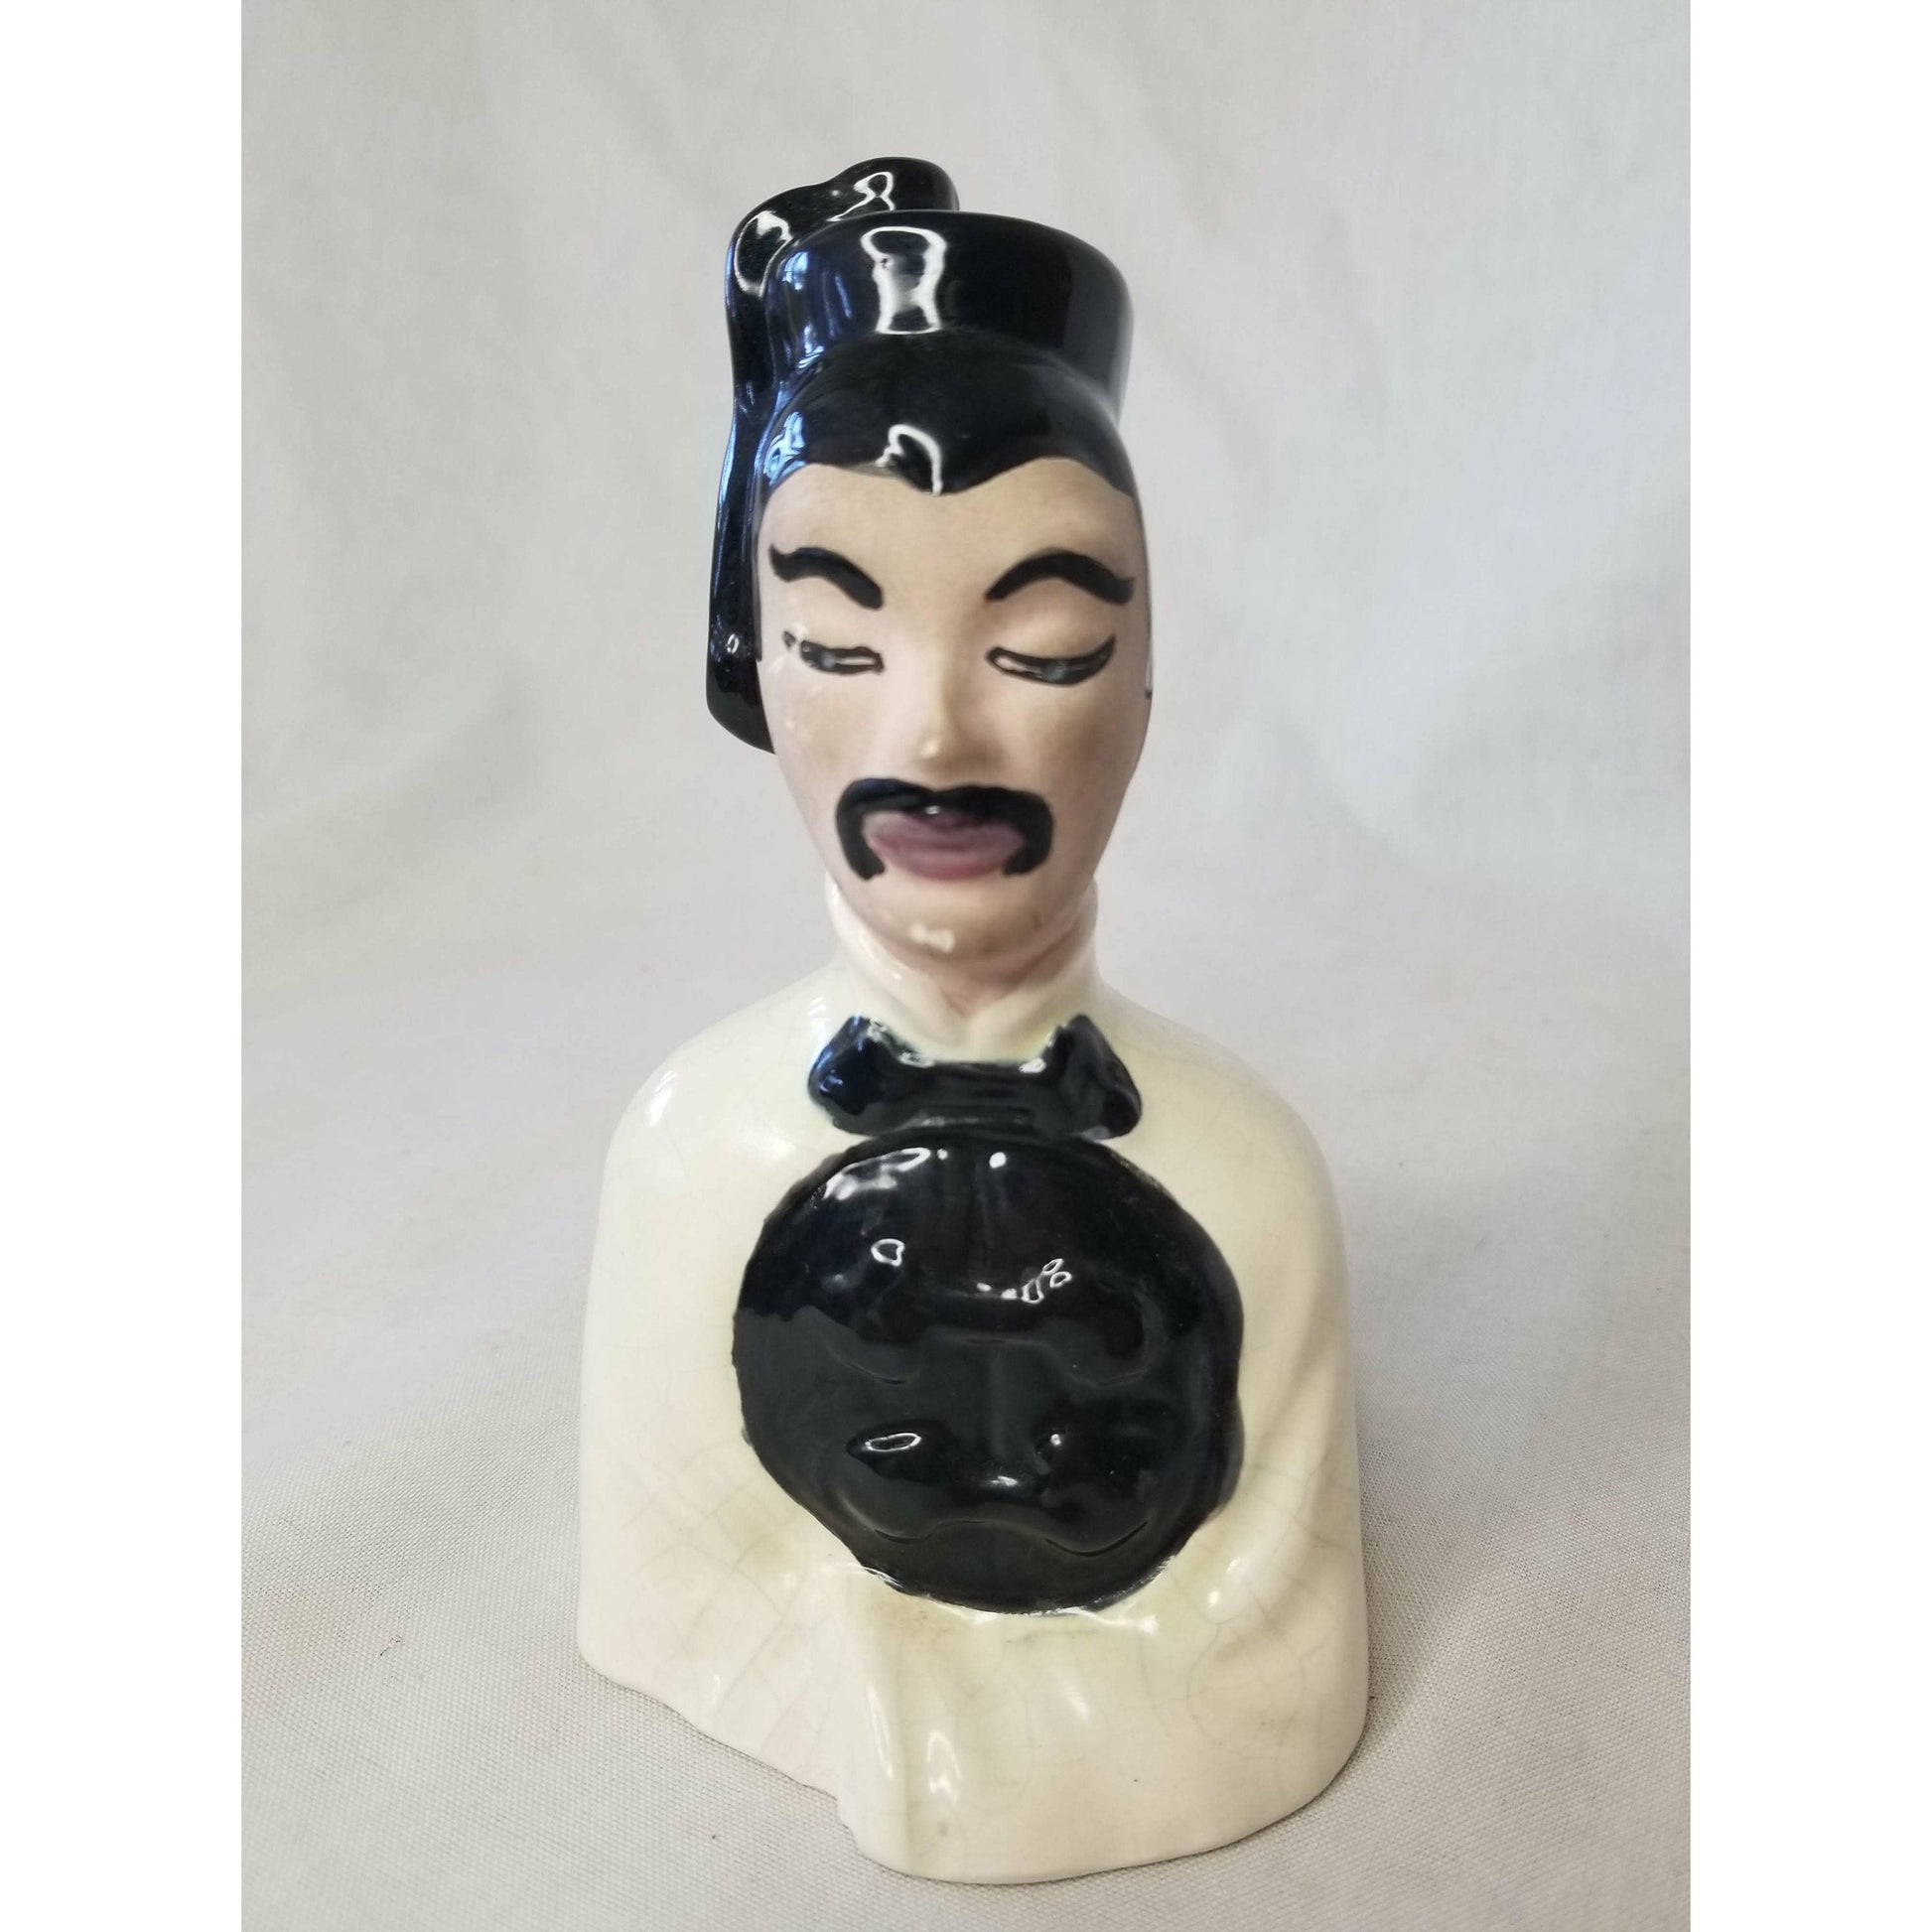 Thai Chinese Asian Porcelain Man & Woman Head Busts ~ Mid Century Modern 1950s ~ Collectible Figurine Set of 2